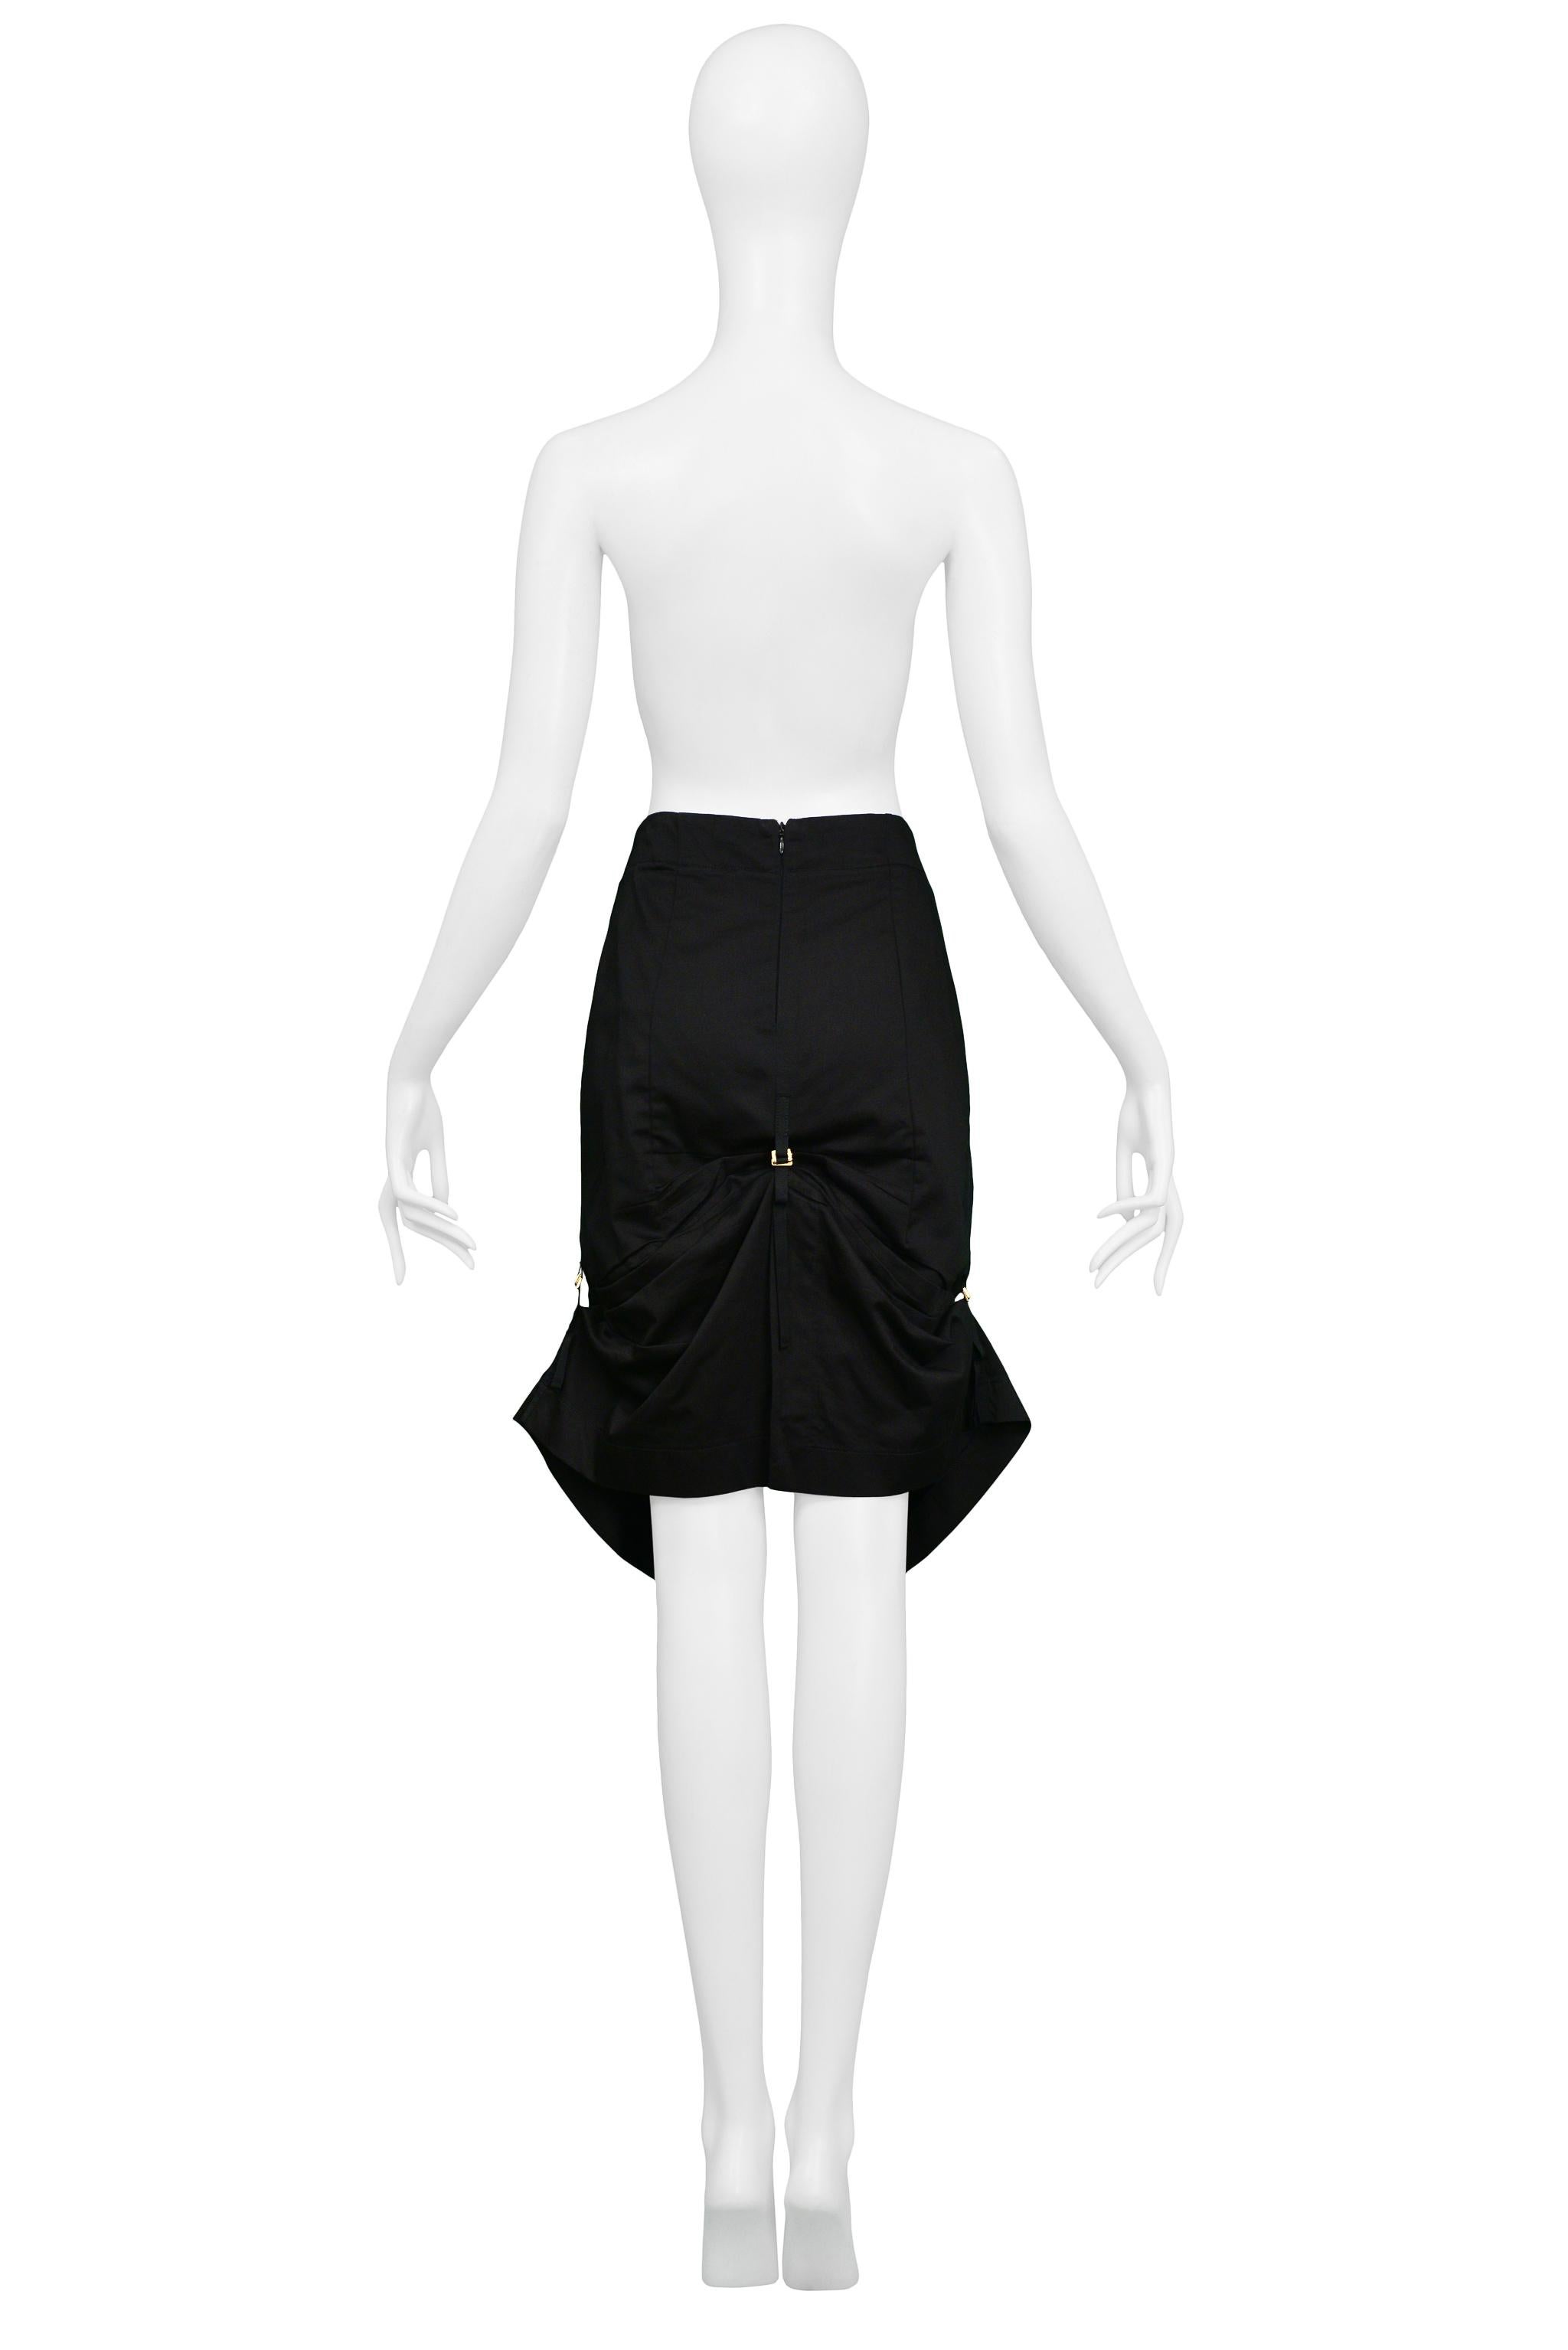 Alexander Mcqueen Black Pencil Skirt With Gold Hardware In Excellent Condition For Sale In Los Angeles, CA